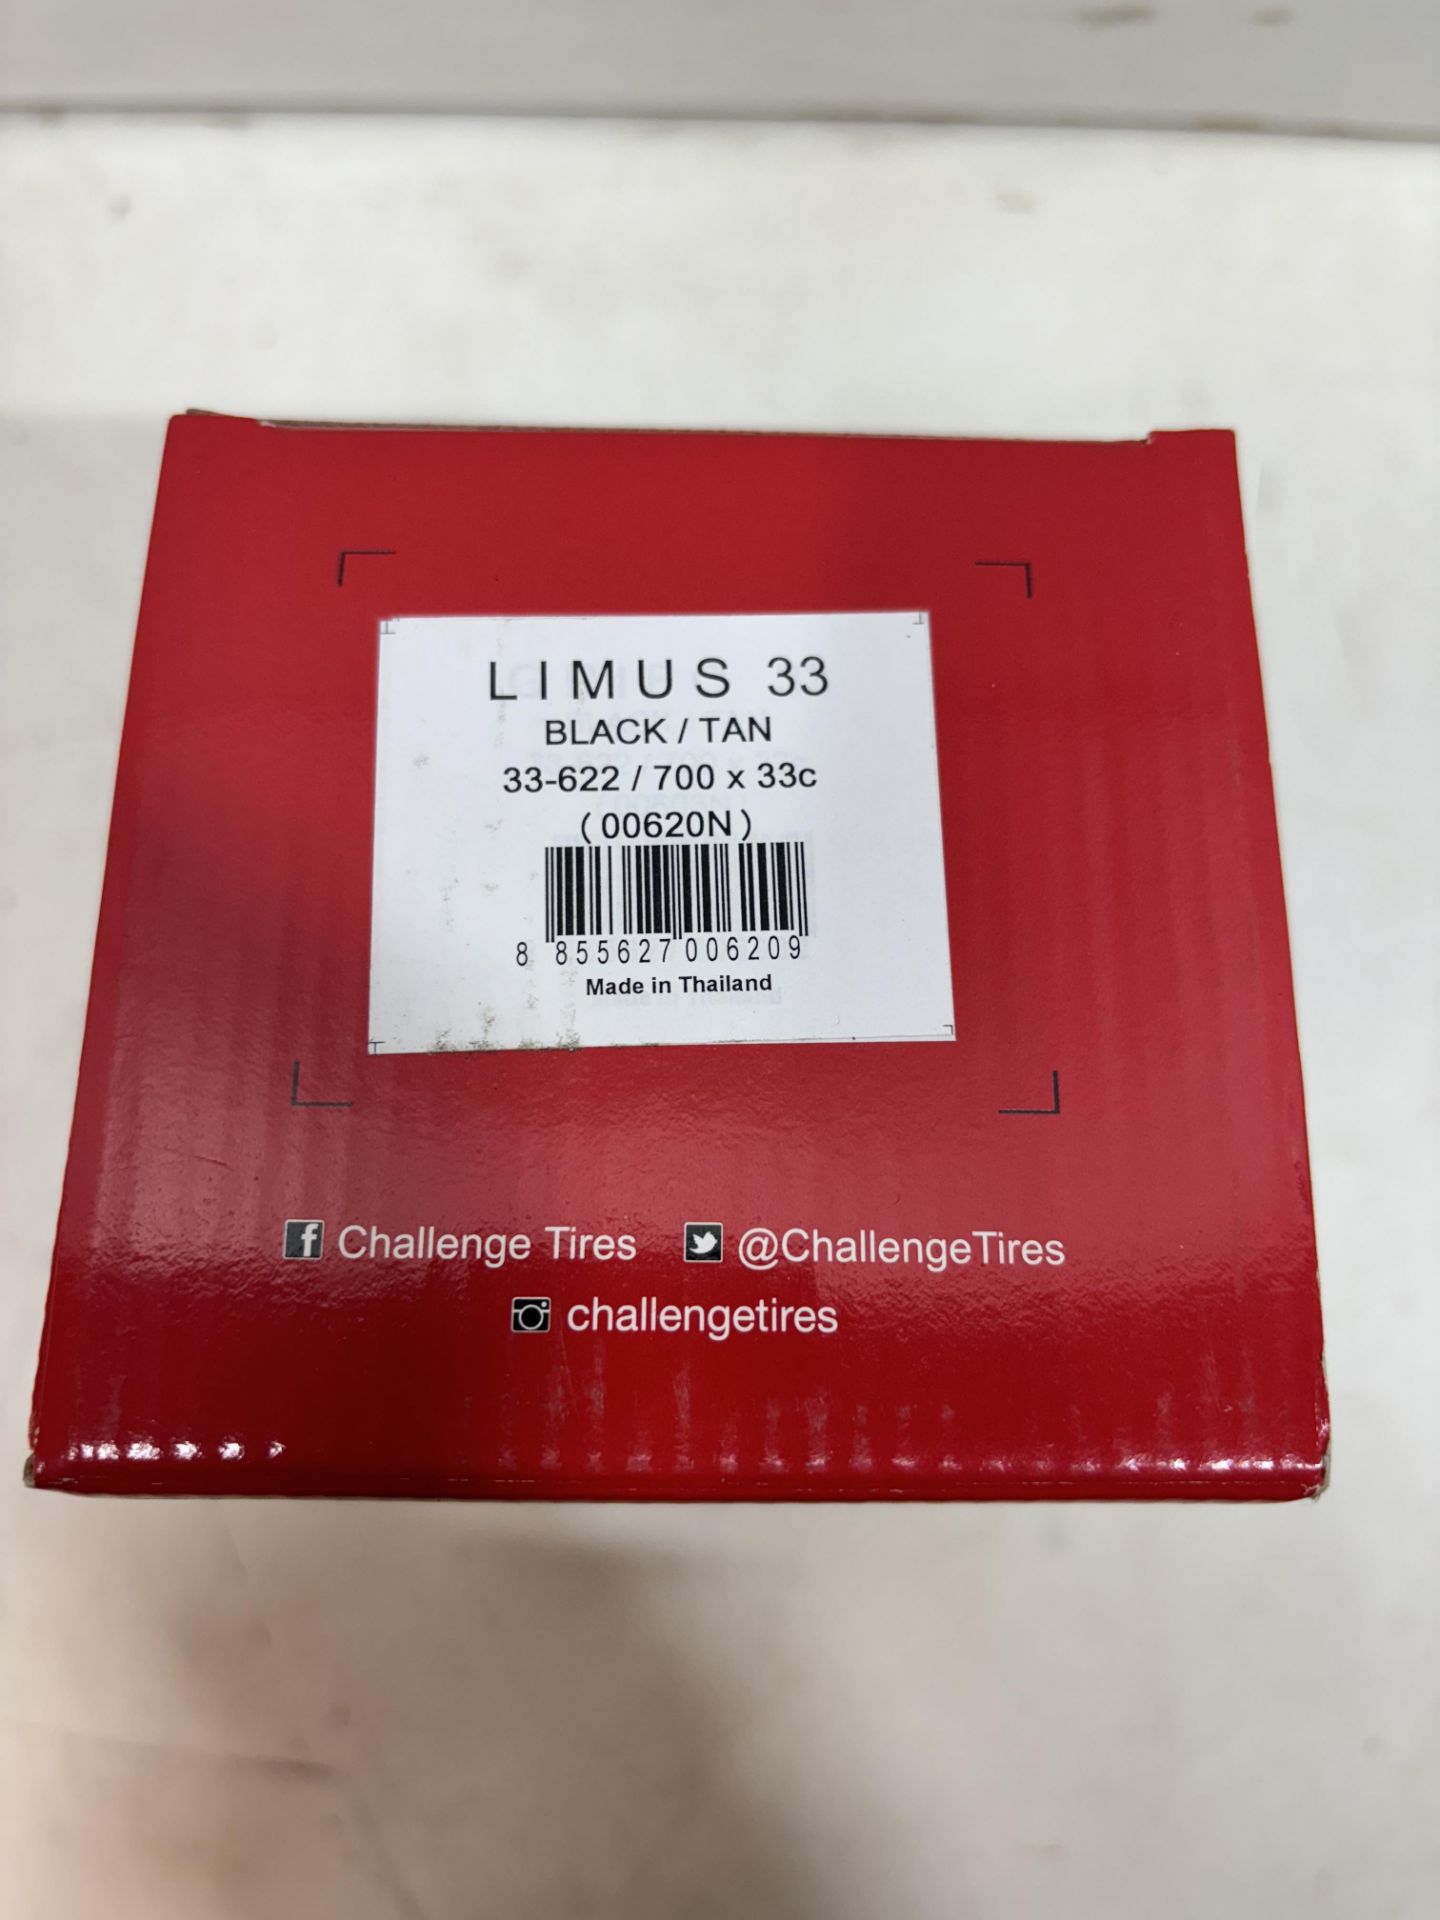 Challenge Limus 33 HCL tire 33-622 black/brown, 700x33c - Image 3 of 3